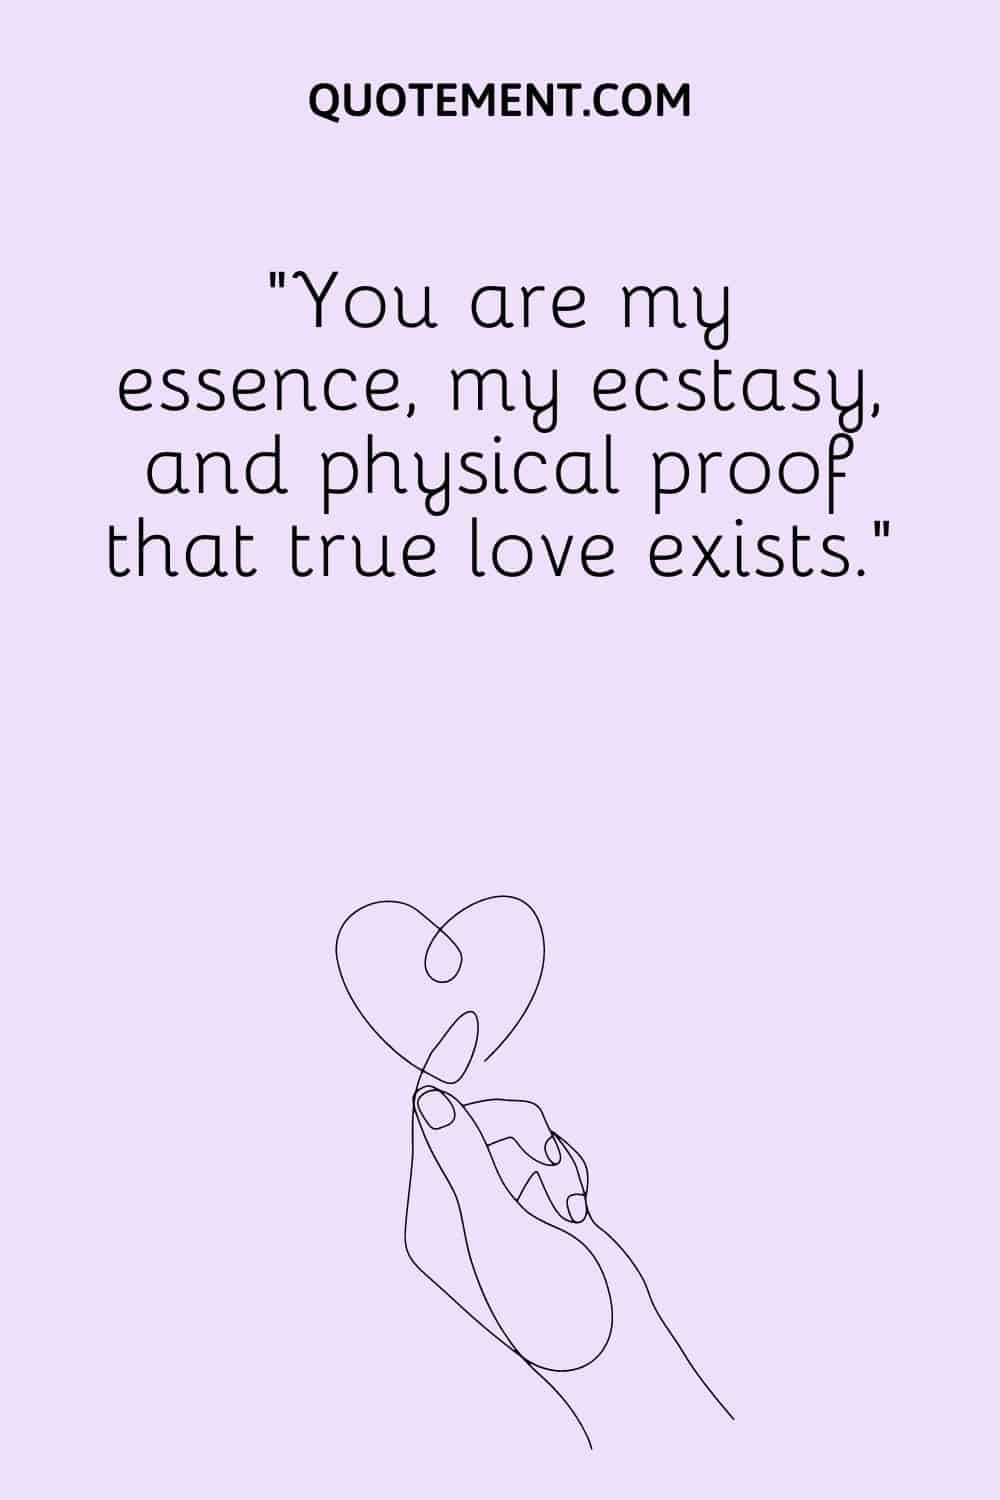 You are my essence, my ecstasy, and physical proof that true love exists